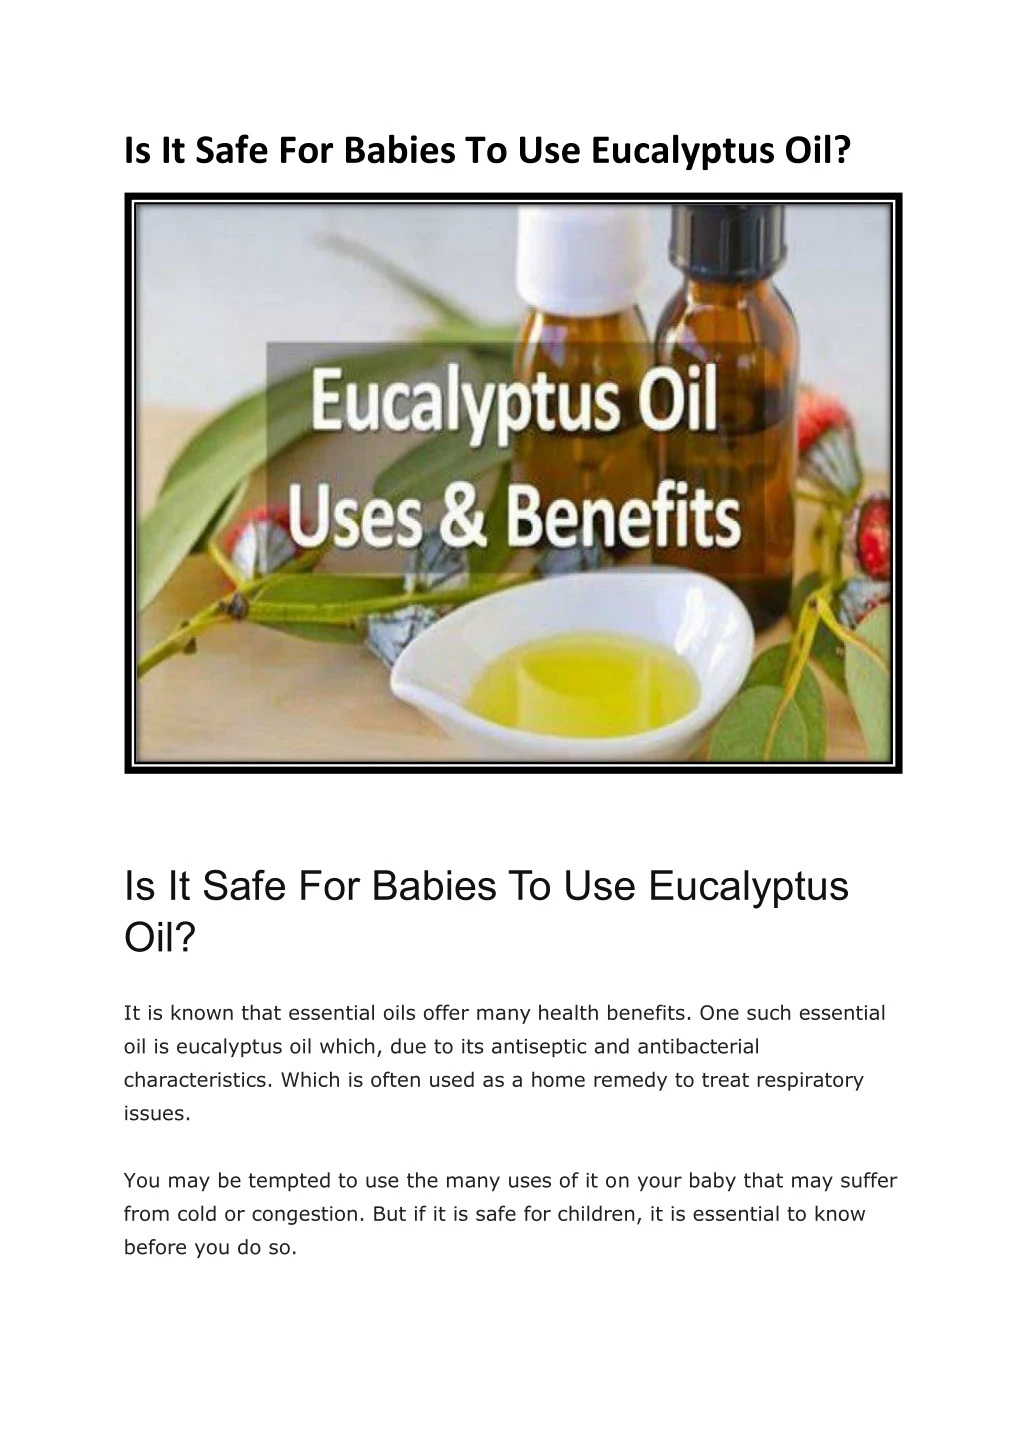 is it safe for babies to use eucalyptus oil